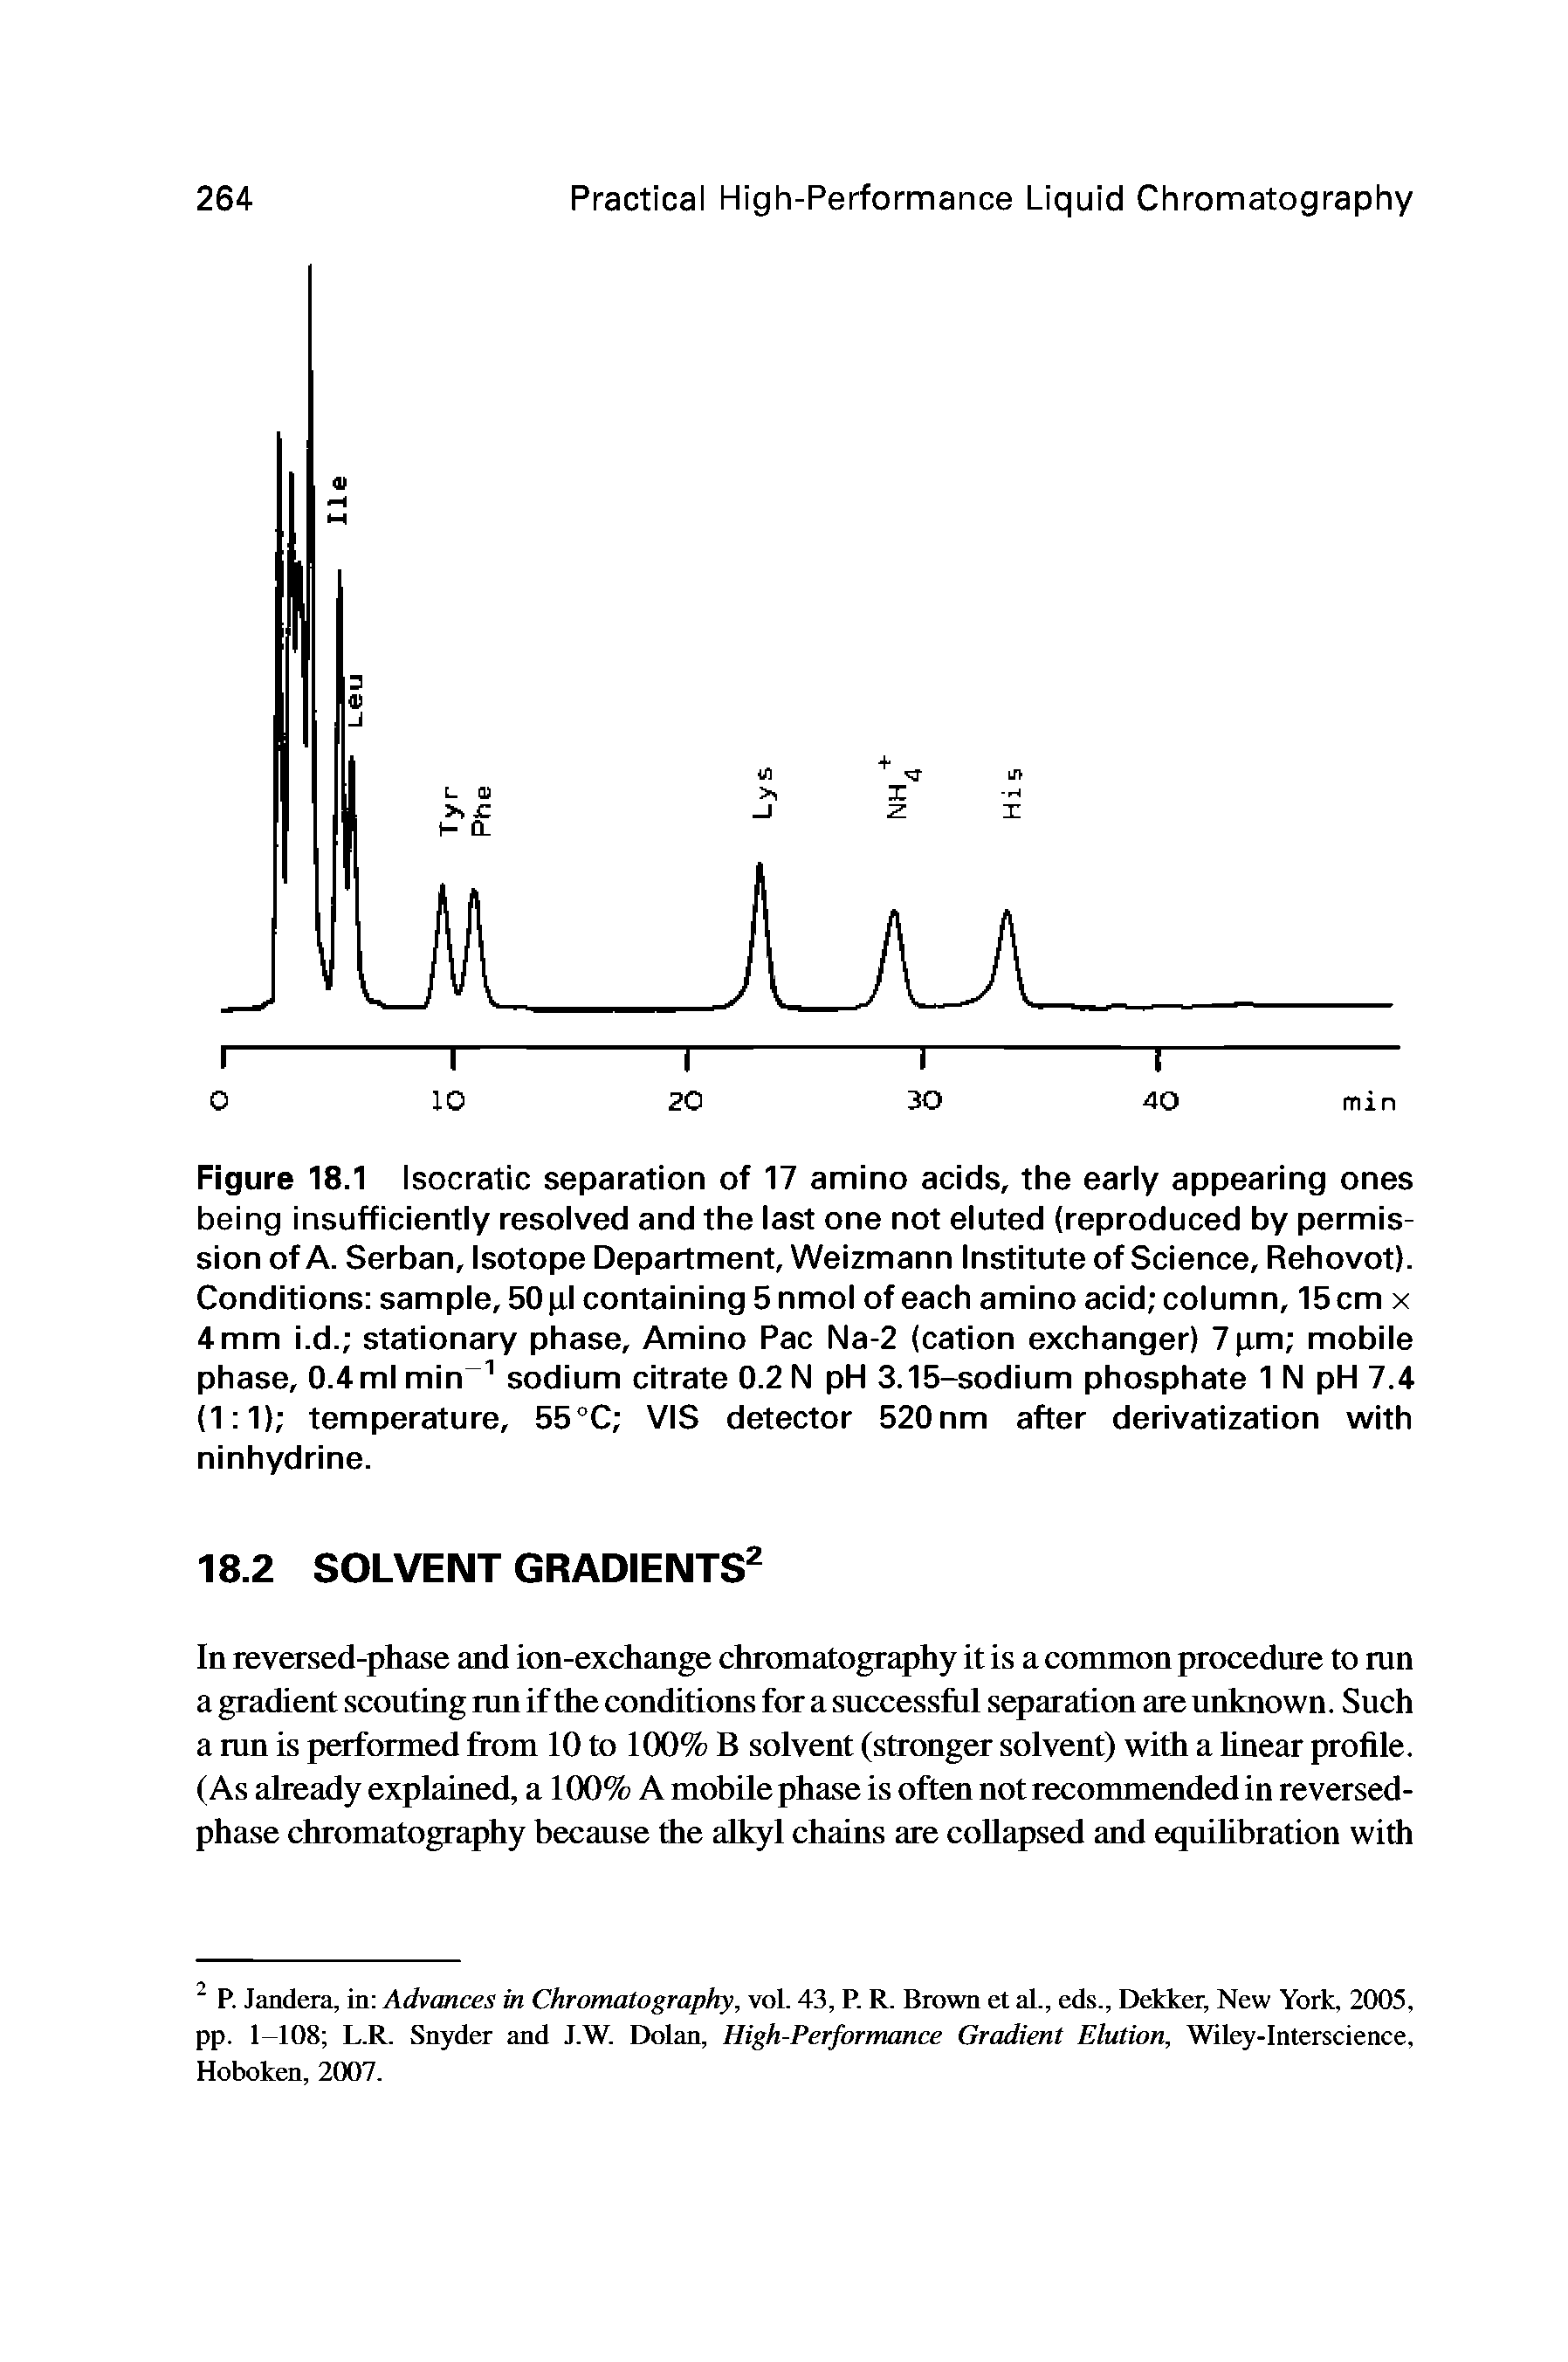 Figure 18.1 Isocratic separation of 17 amino acids, the early appearing ones being insufficiently resolved and the last one not eluted (reproduced by permission of A. Serban, Isotope Department, Weizmann Institute of Science, Rehovot). Conditions sample, 50 ixl containing 5 nmol of each amino acid column, 15 cm x 4 mm i.d. stationary phase. Amino Pac Na-2 (cation exchanger) 7 im mobile phase, 0.4 ml min sodium citrate 0.2 N pH 3.15-sodium phosphate 1 N pH 7.4 (1 1) temperature, BB C VIS detector 520nm after derivatization with ninhydrine.